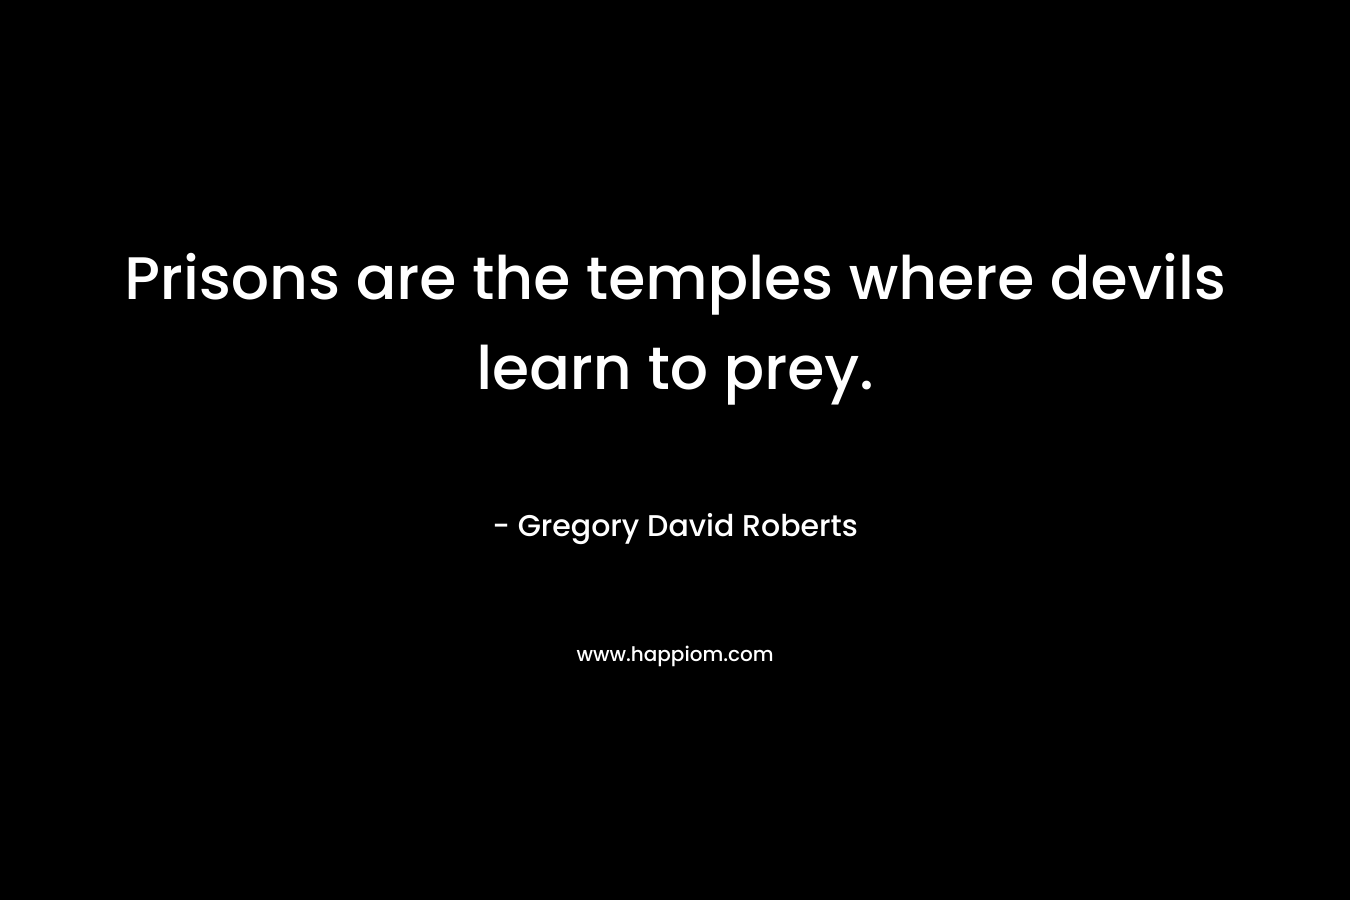 Prisons are the temples where devils learn to prey. – Gregory David Roberts